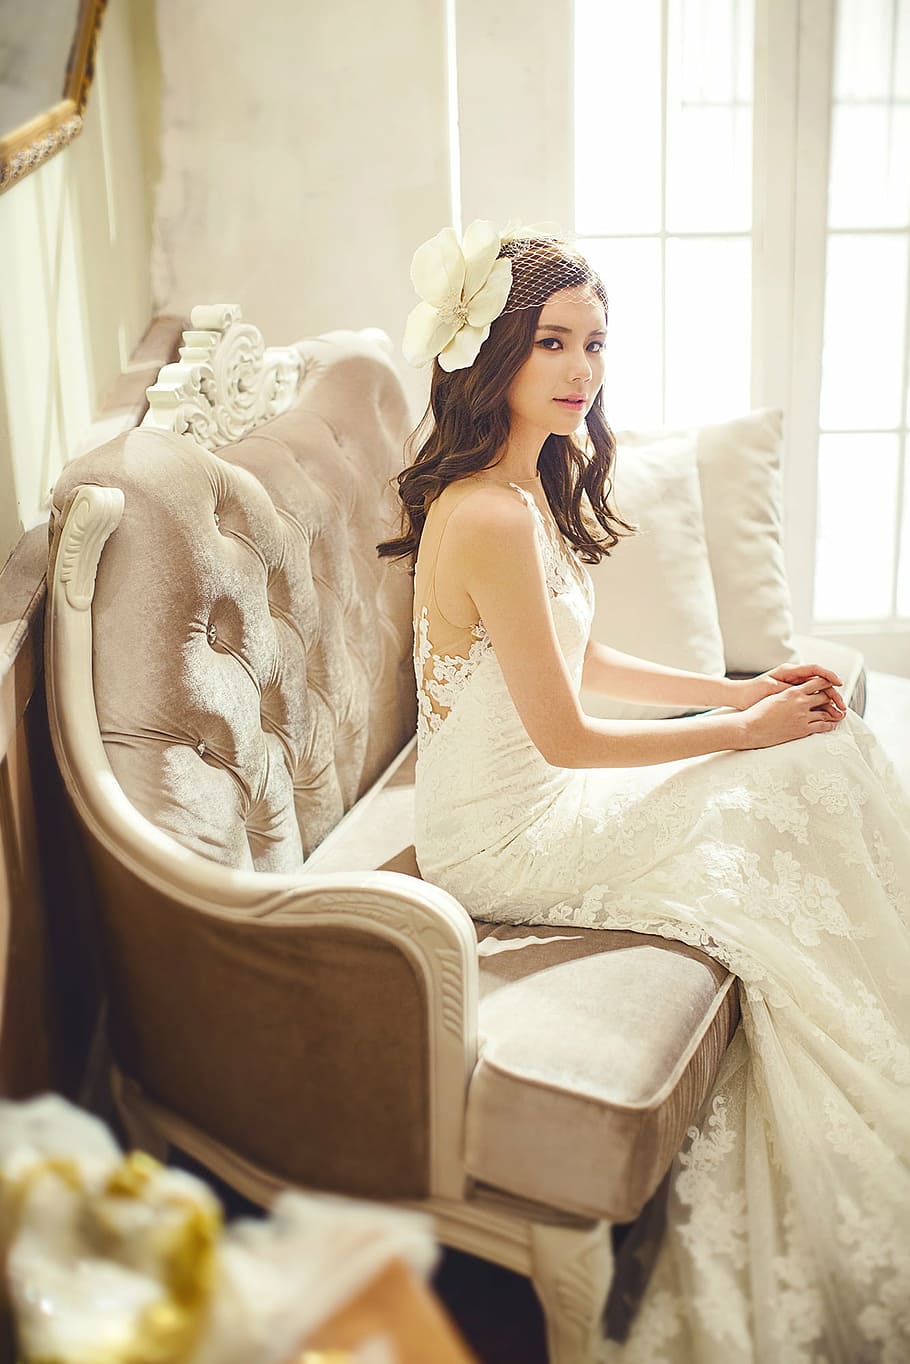 woman, wearing, white, floral, night gown, sitting, sofa, wedding dresses, fashion, character